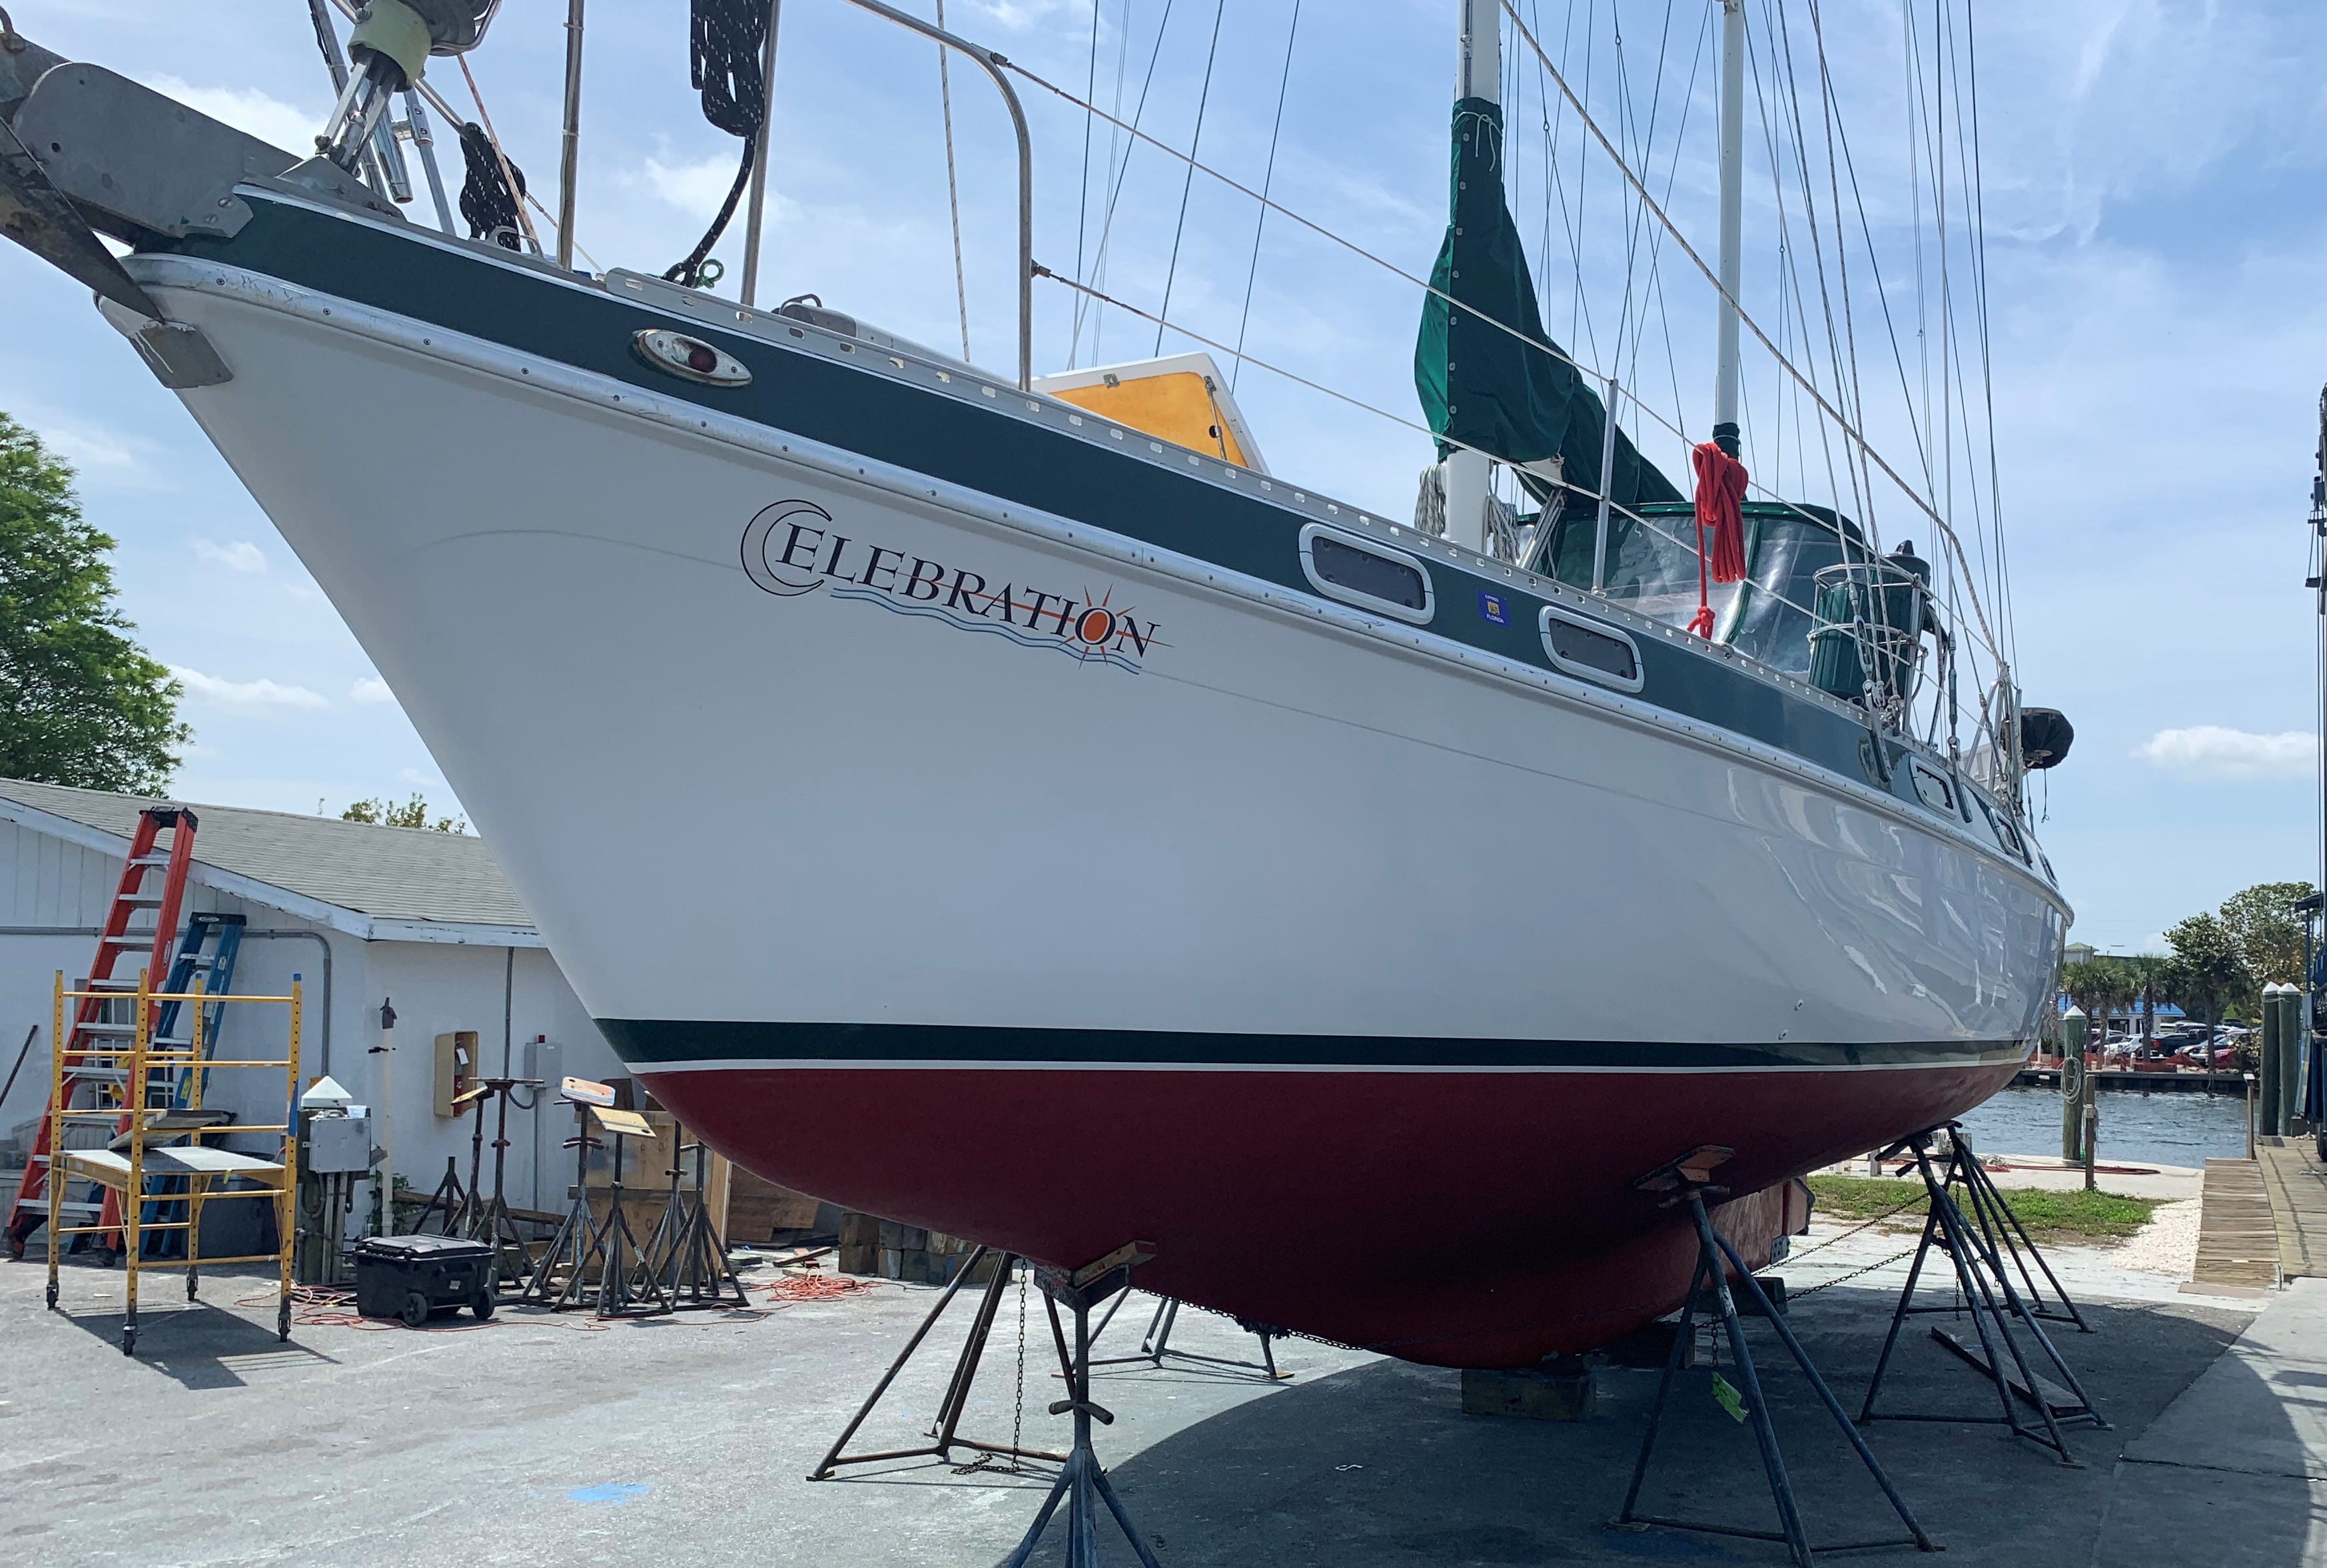 1979 Morgan 415 Out Island Ketch Sailboat for sale in St Petersburg, FL - image 11 